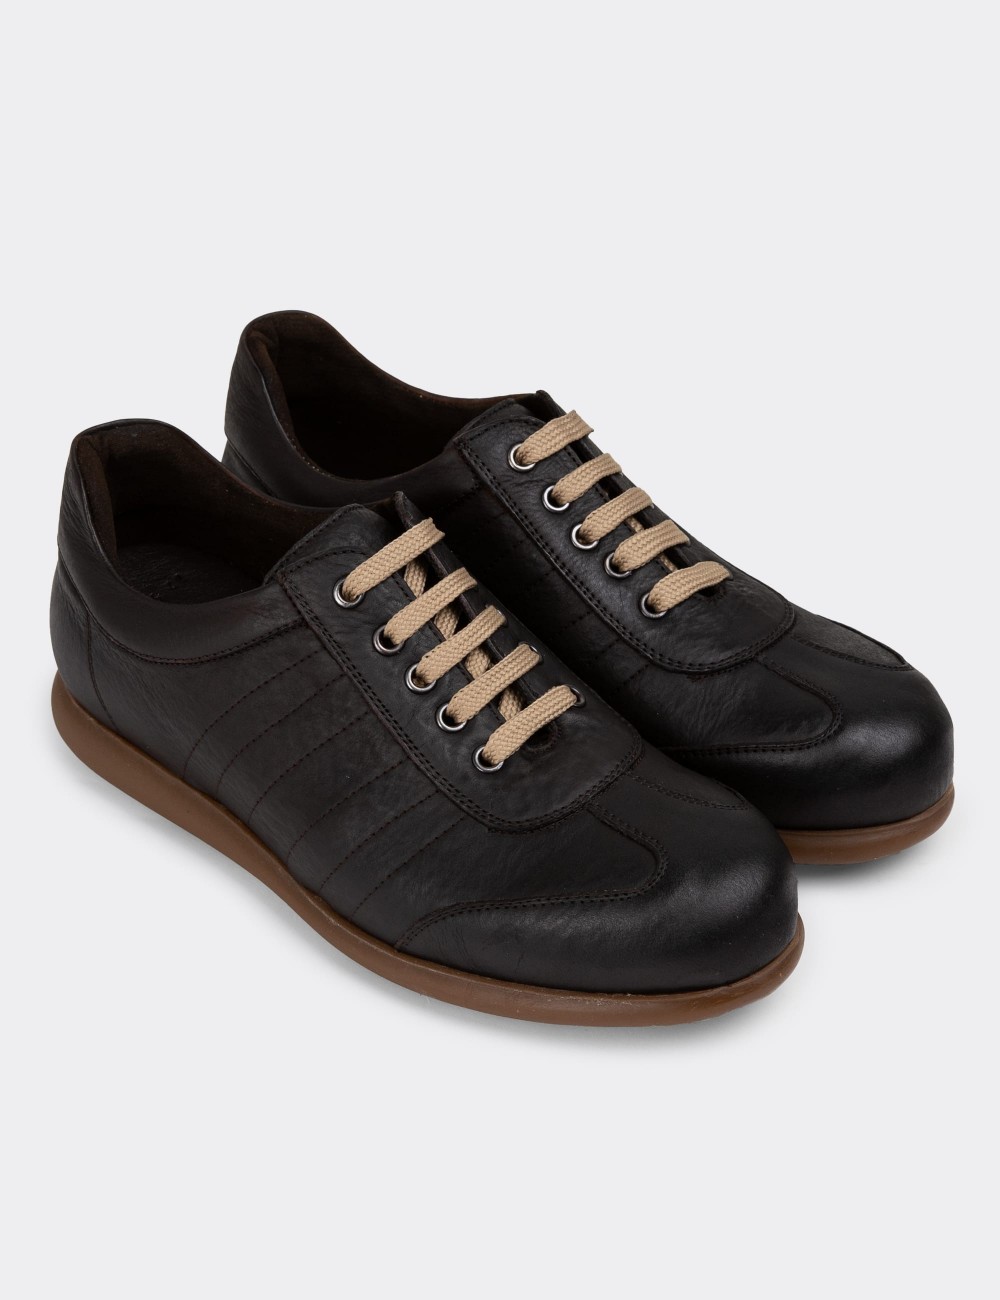 Brown Leather Lace-up Shoes - 01826MKHVC22